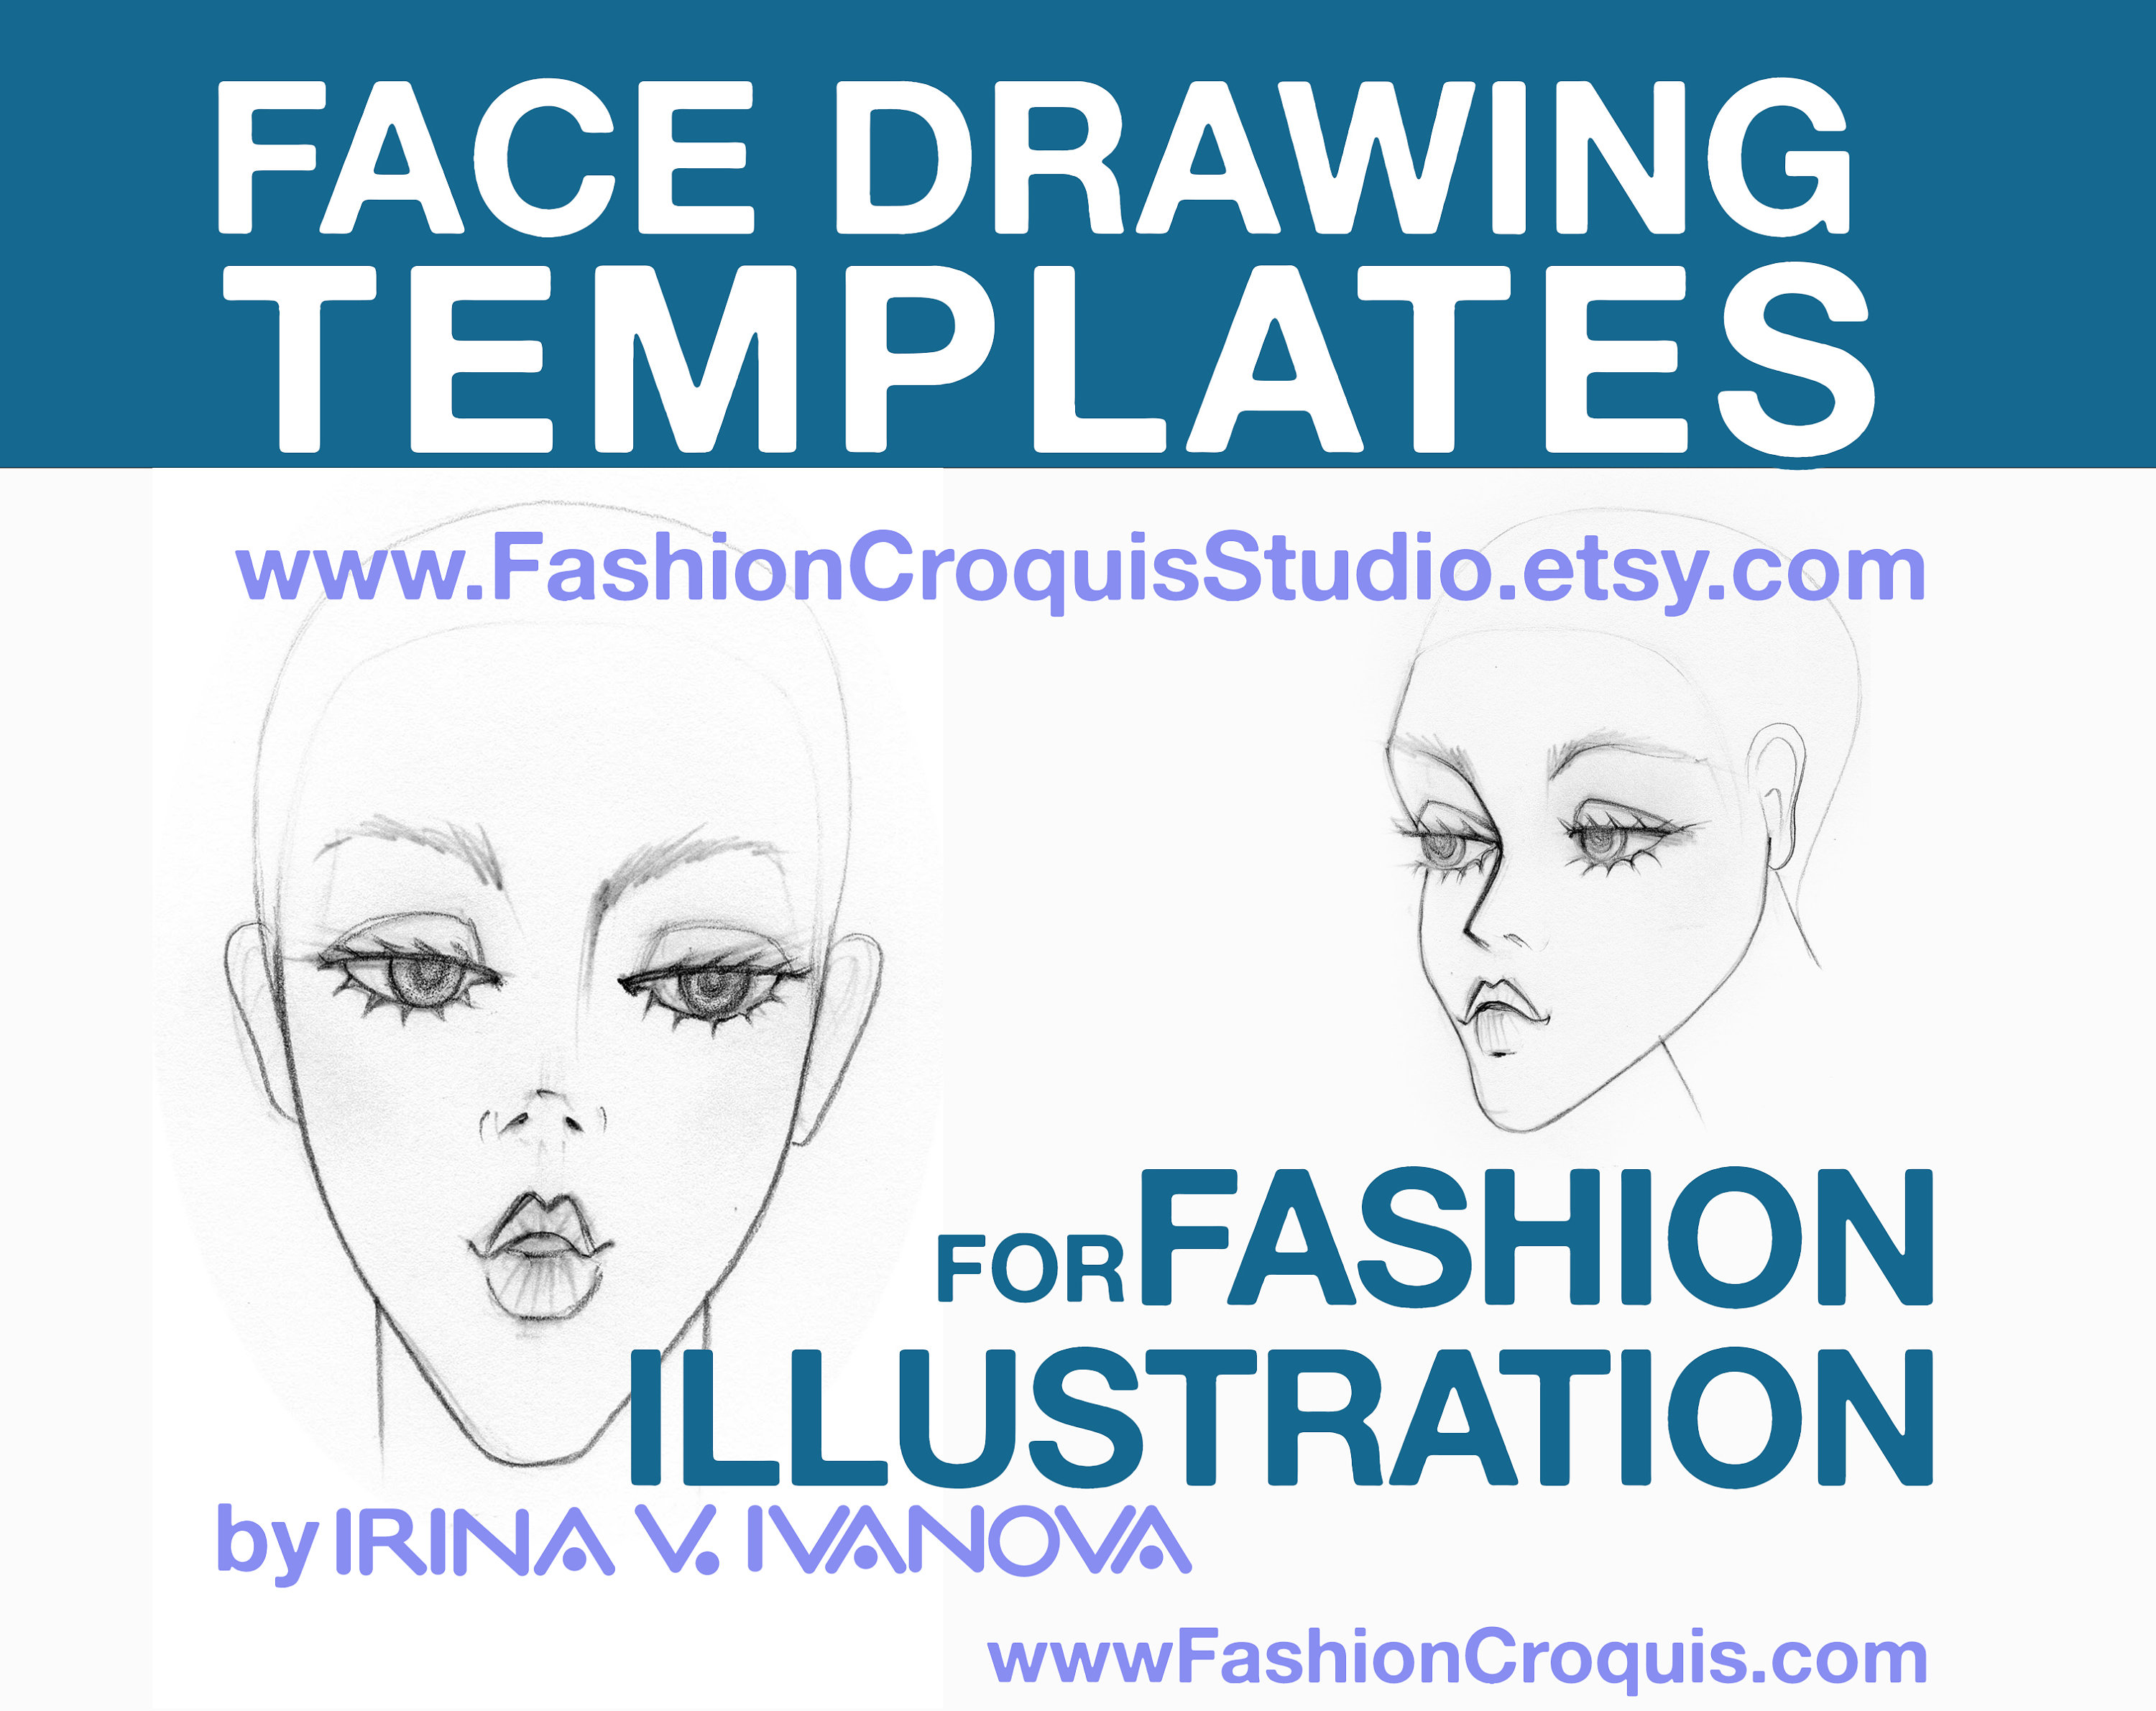 Fashion Illustration Downloadable Printable Croquis: Face and Head Drawing  Templates. PDF File Format With JPG Files. Standard Style. 